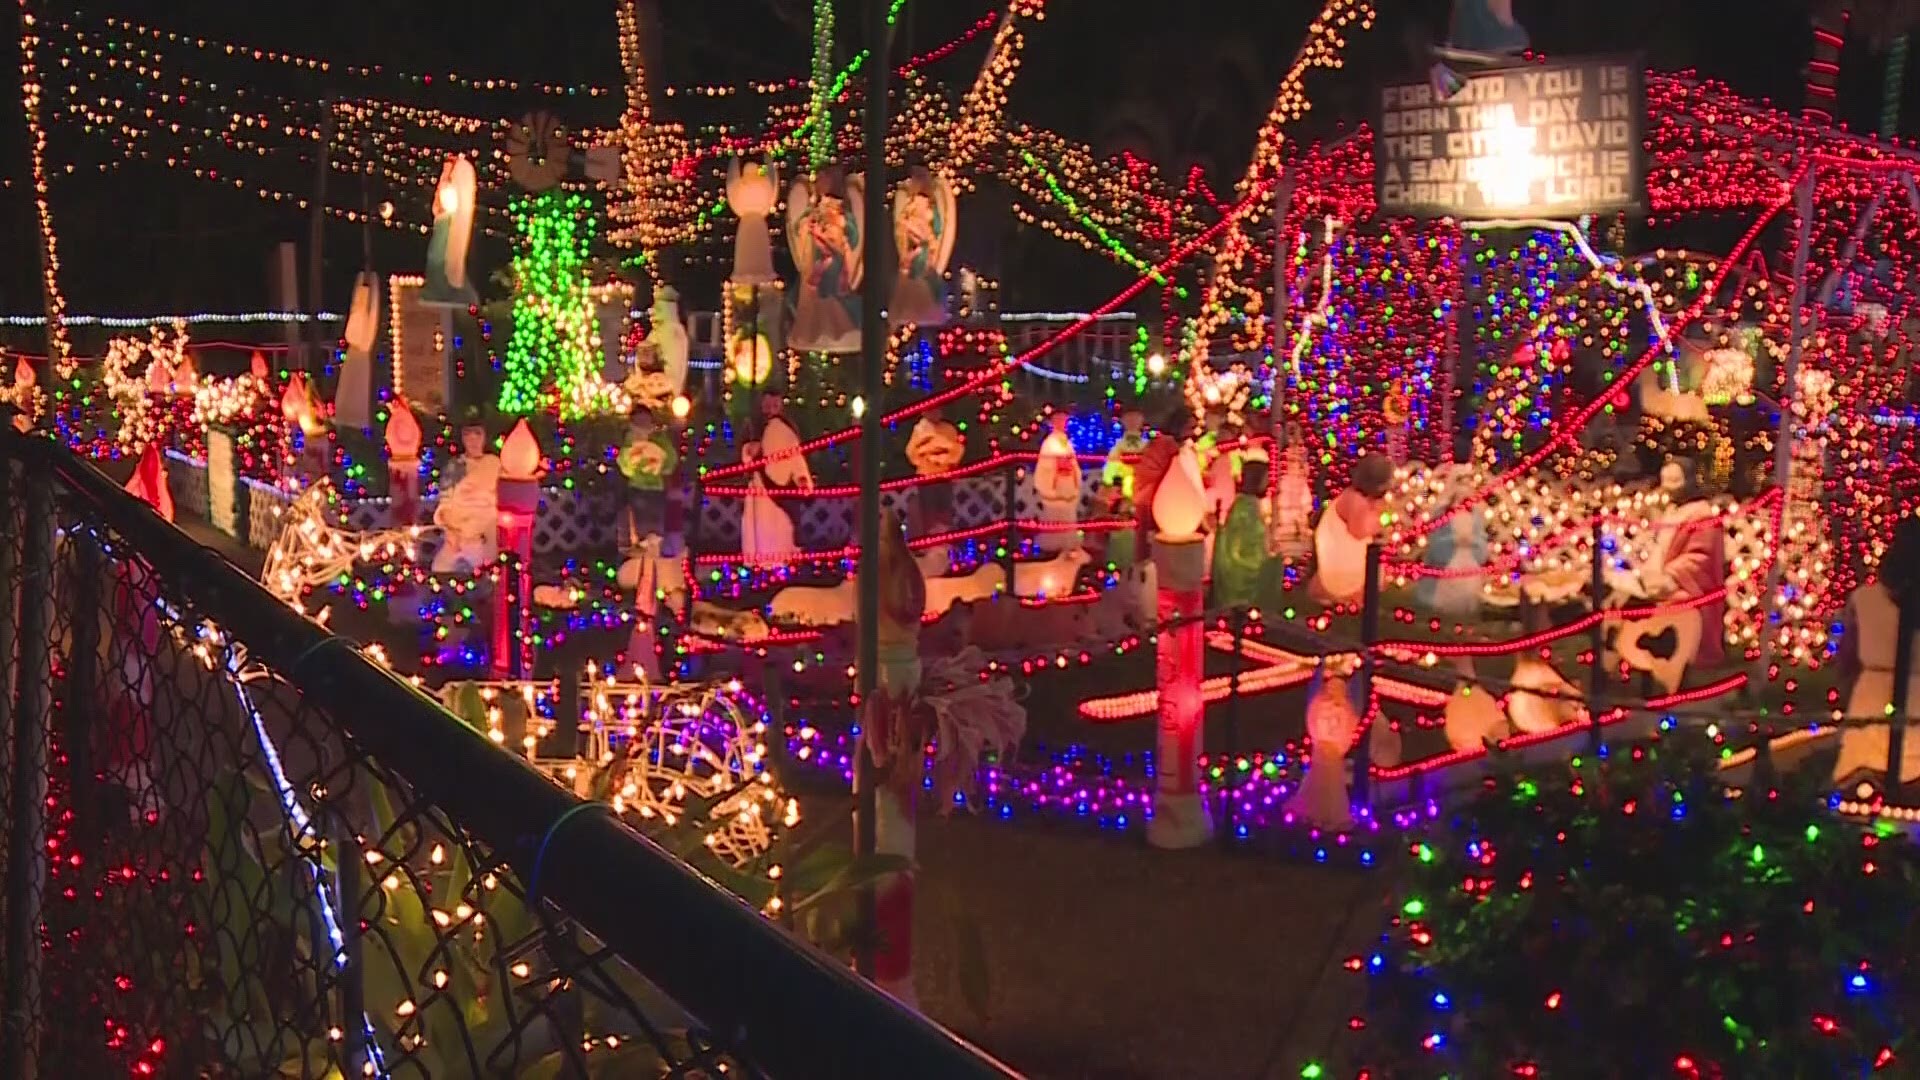 With more people staying home for the holidays, there's been a surge in buying Christmas decorations.